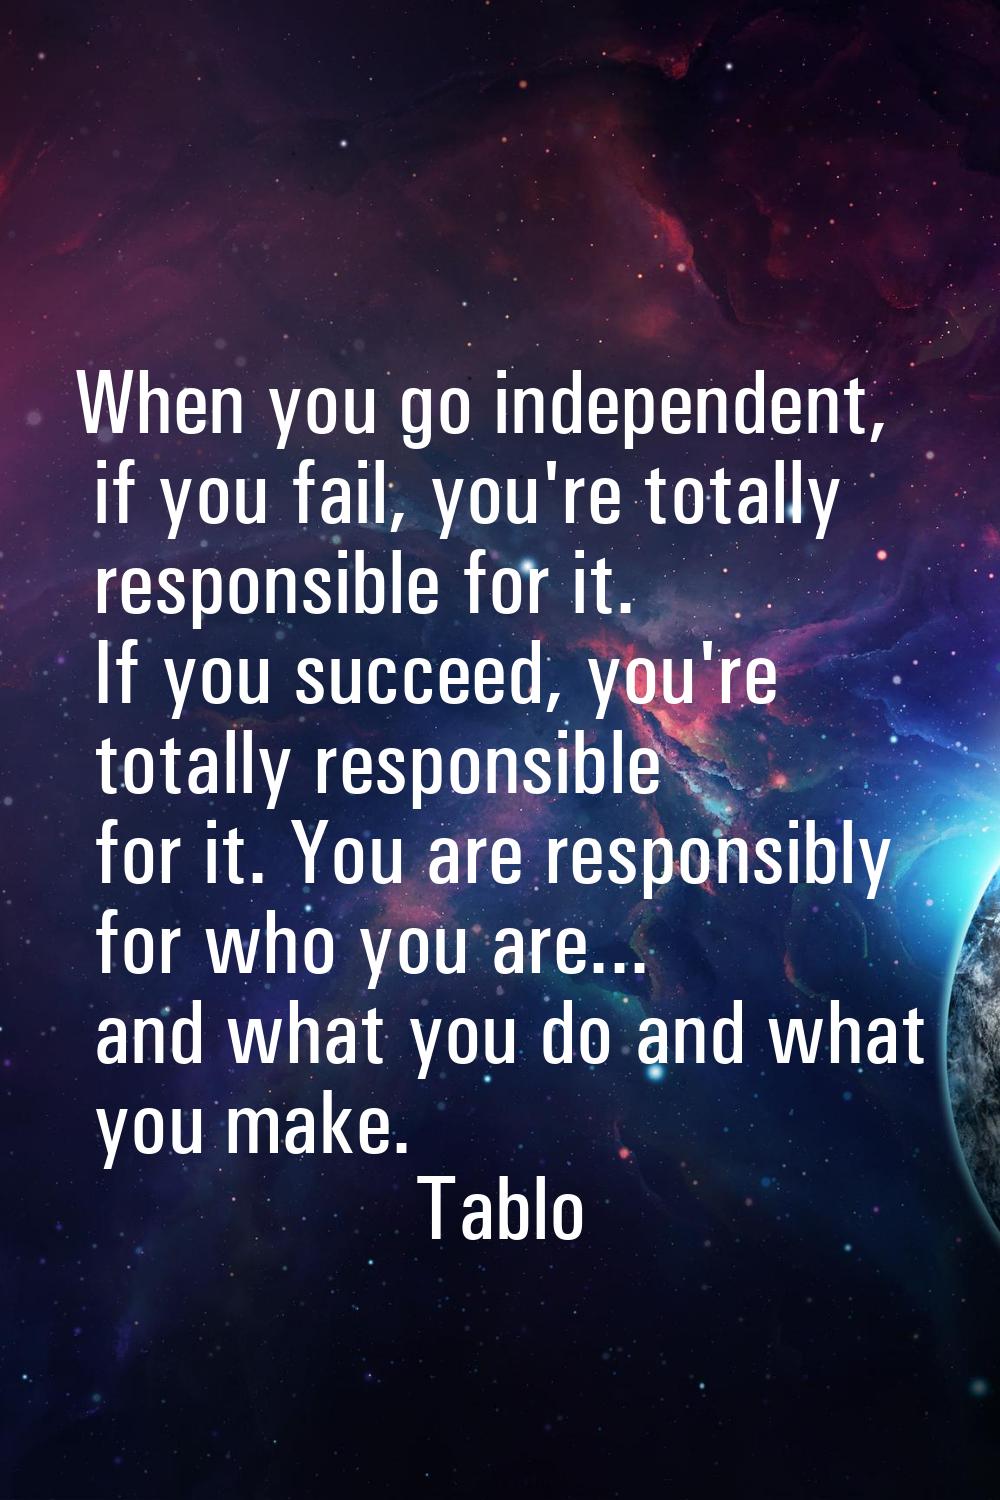 When you go independent, if you fail, you're totally responsible for it. If you succeed, you're tot